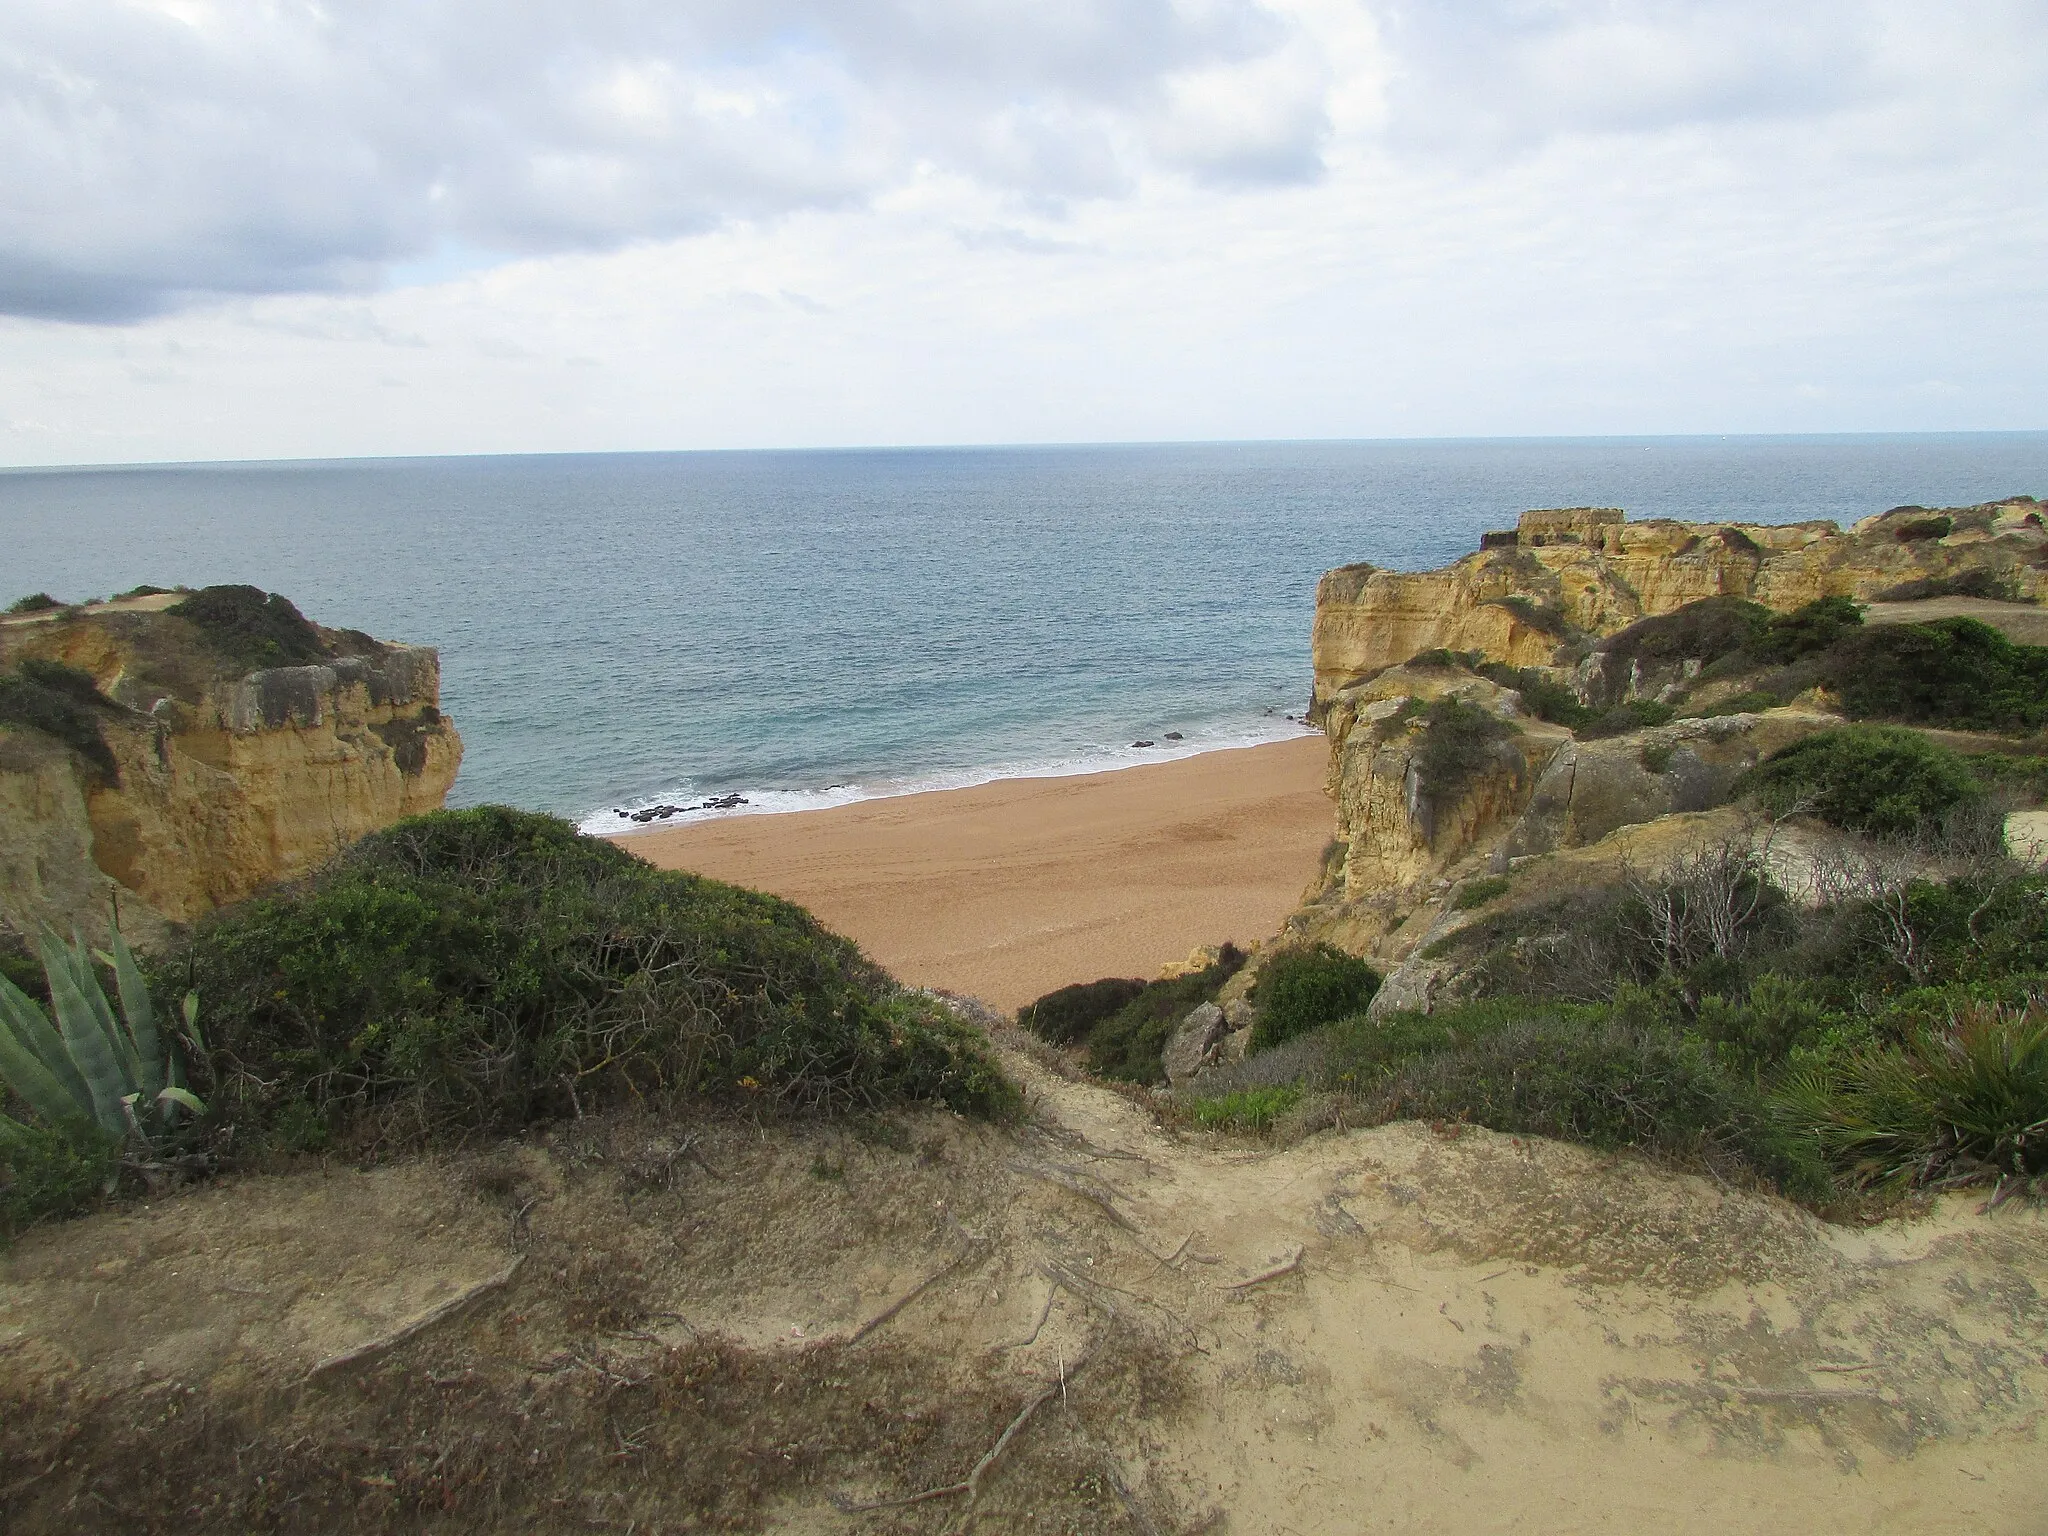 Photo showing: A view of Praia da Maré das Porcas from the cliff tops at the rear of the beach. This beach is in the neighbourhood of Sesmarias west of the city of Albufeira, Algarve, Portugal.